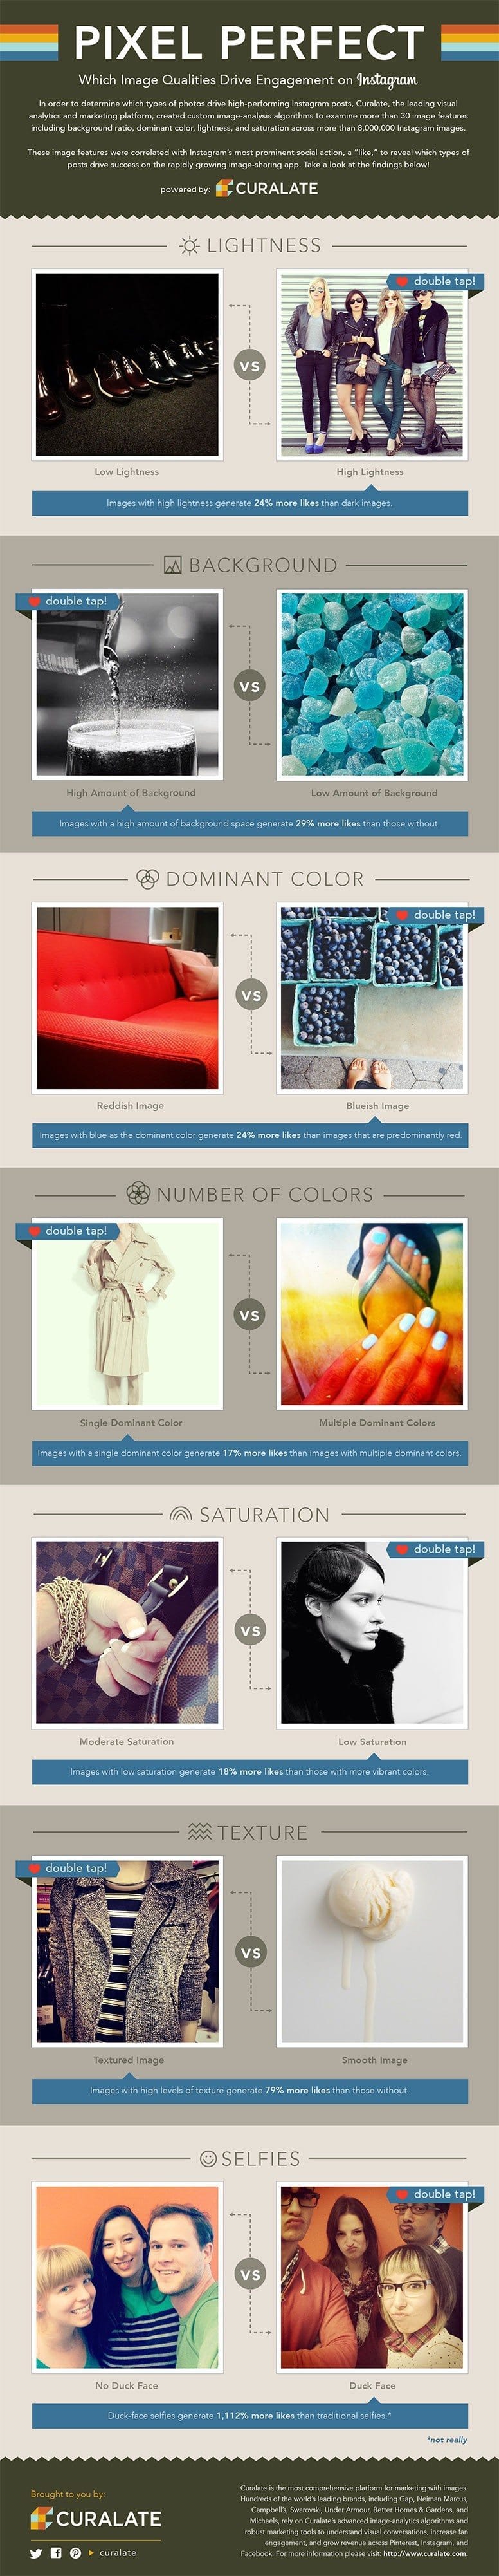 curalate infographic how to get more instagram followers - how to generate more instagram followers